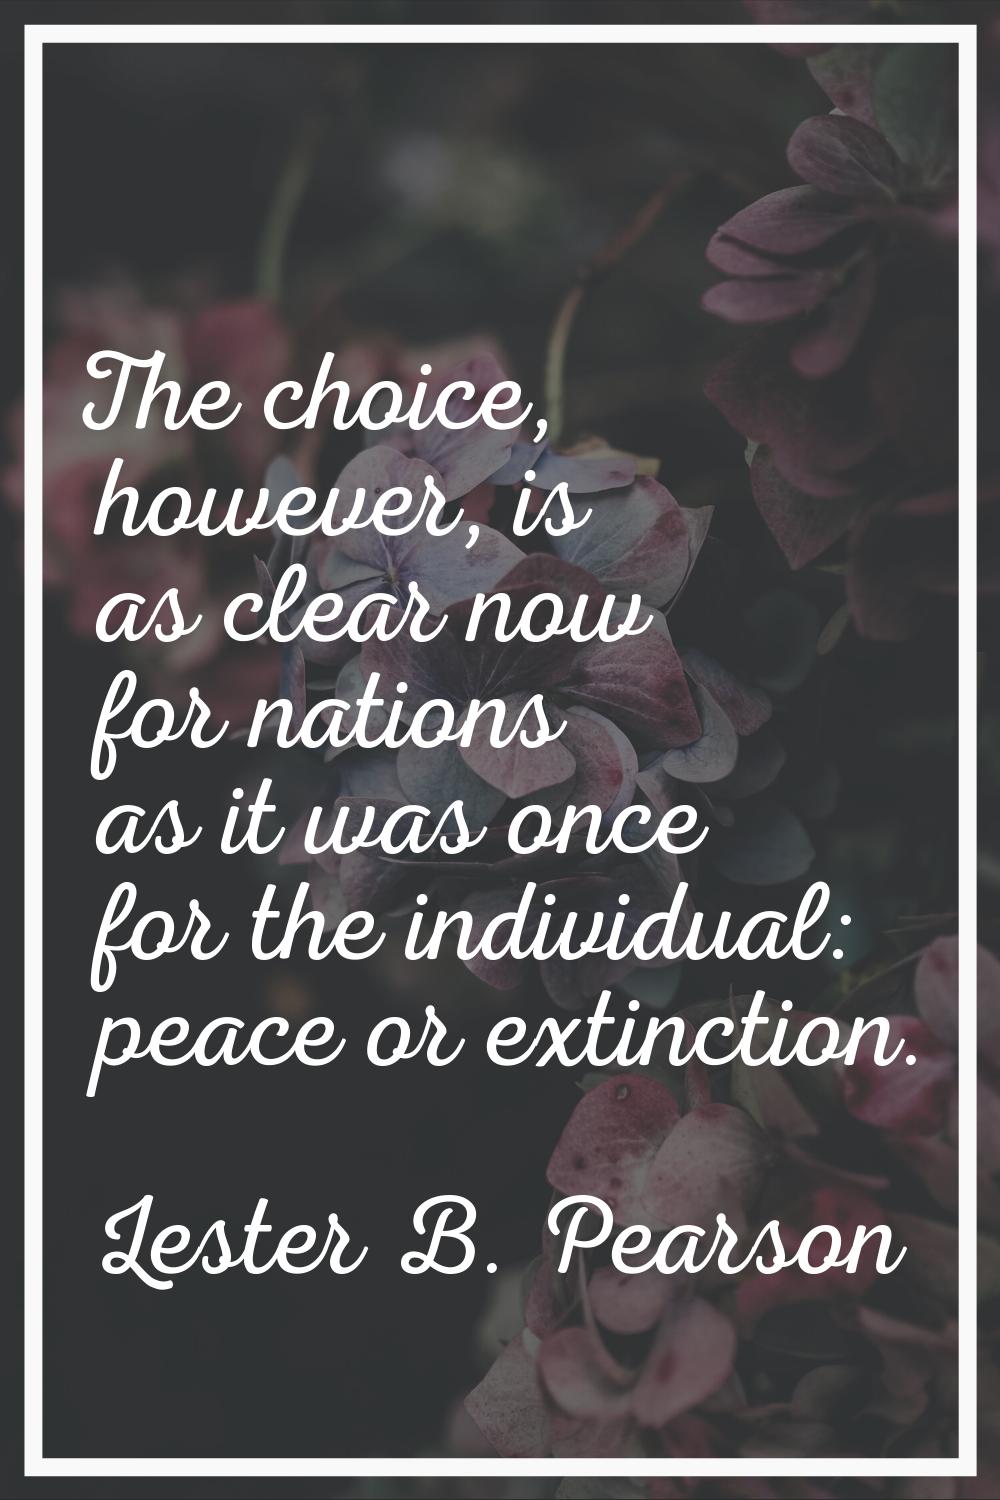 The choice, however, is as clear now for nations as it was once for the individual: peace or extinc